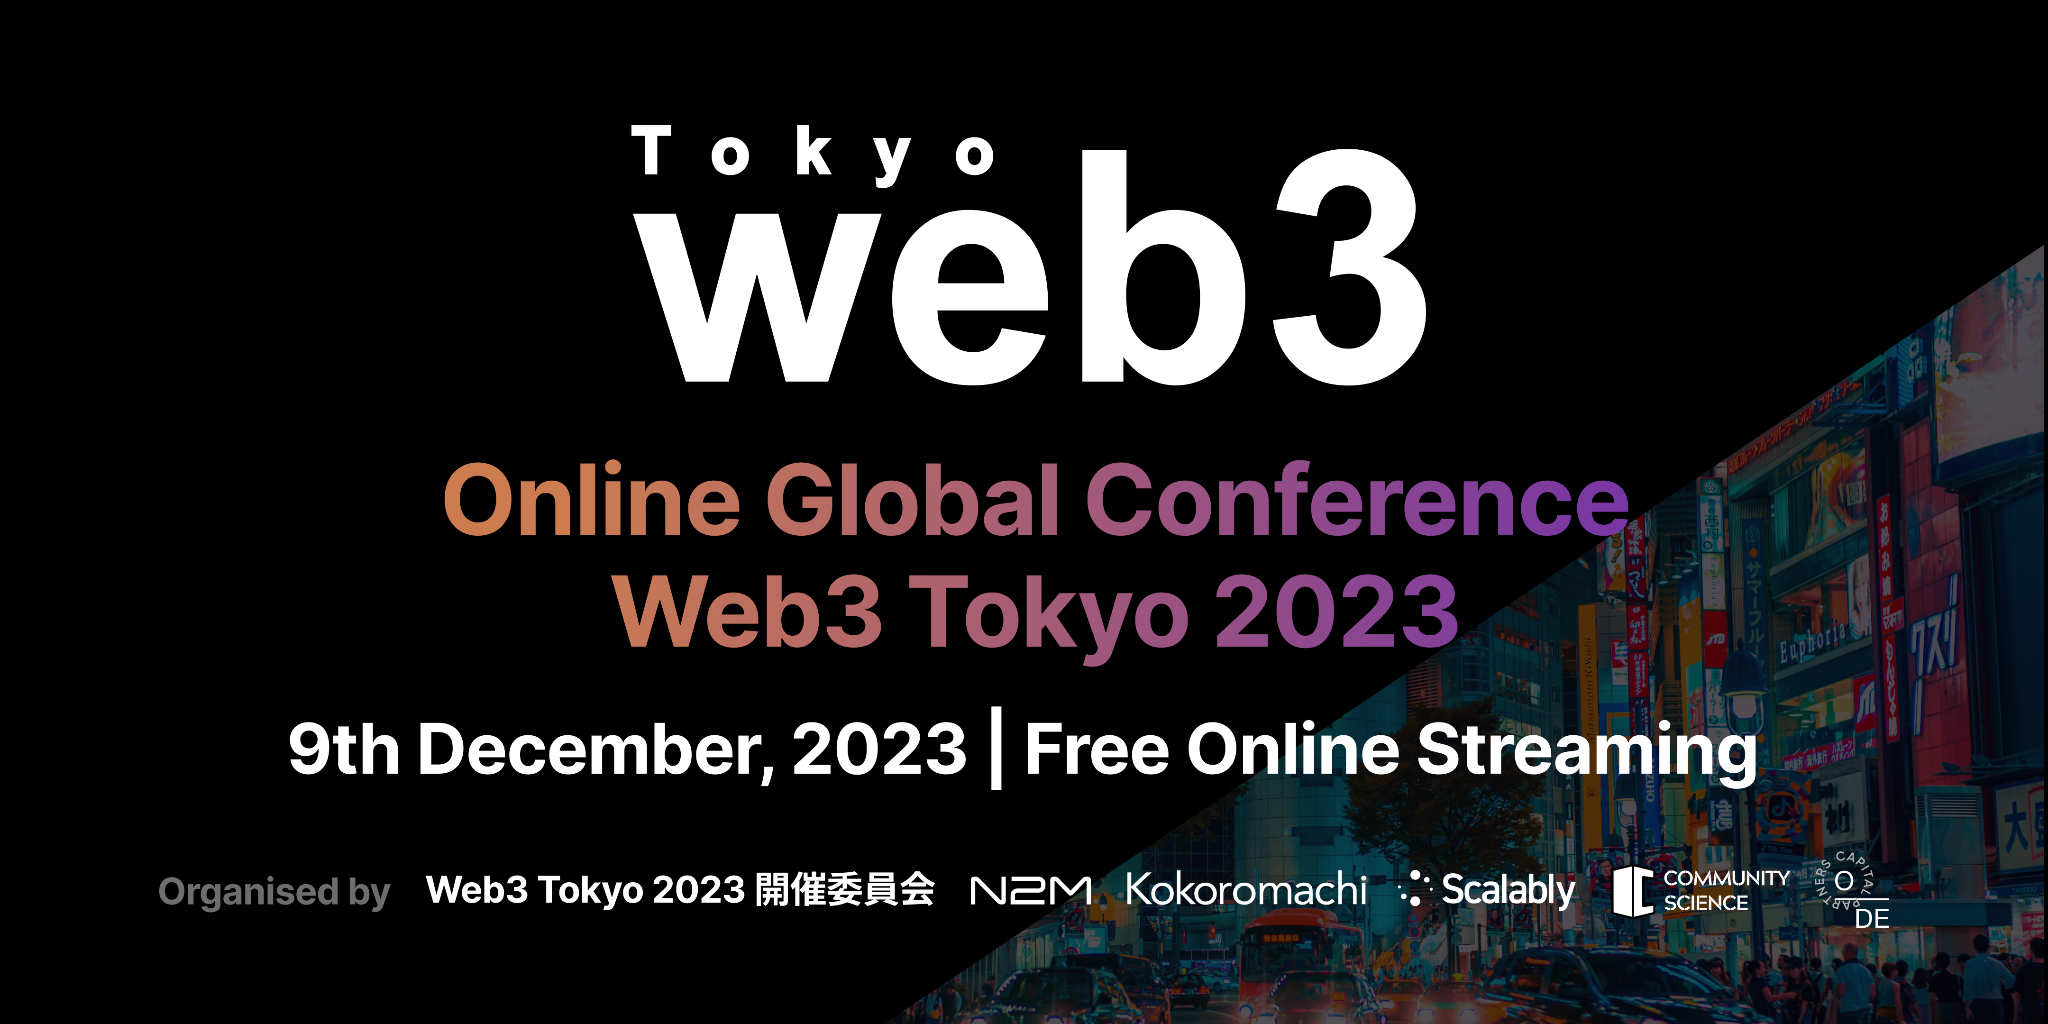 Online Global Web3 Conference “Web3 Tokyo 2023” held on the 9th of December, 2023